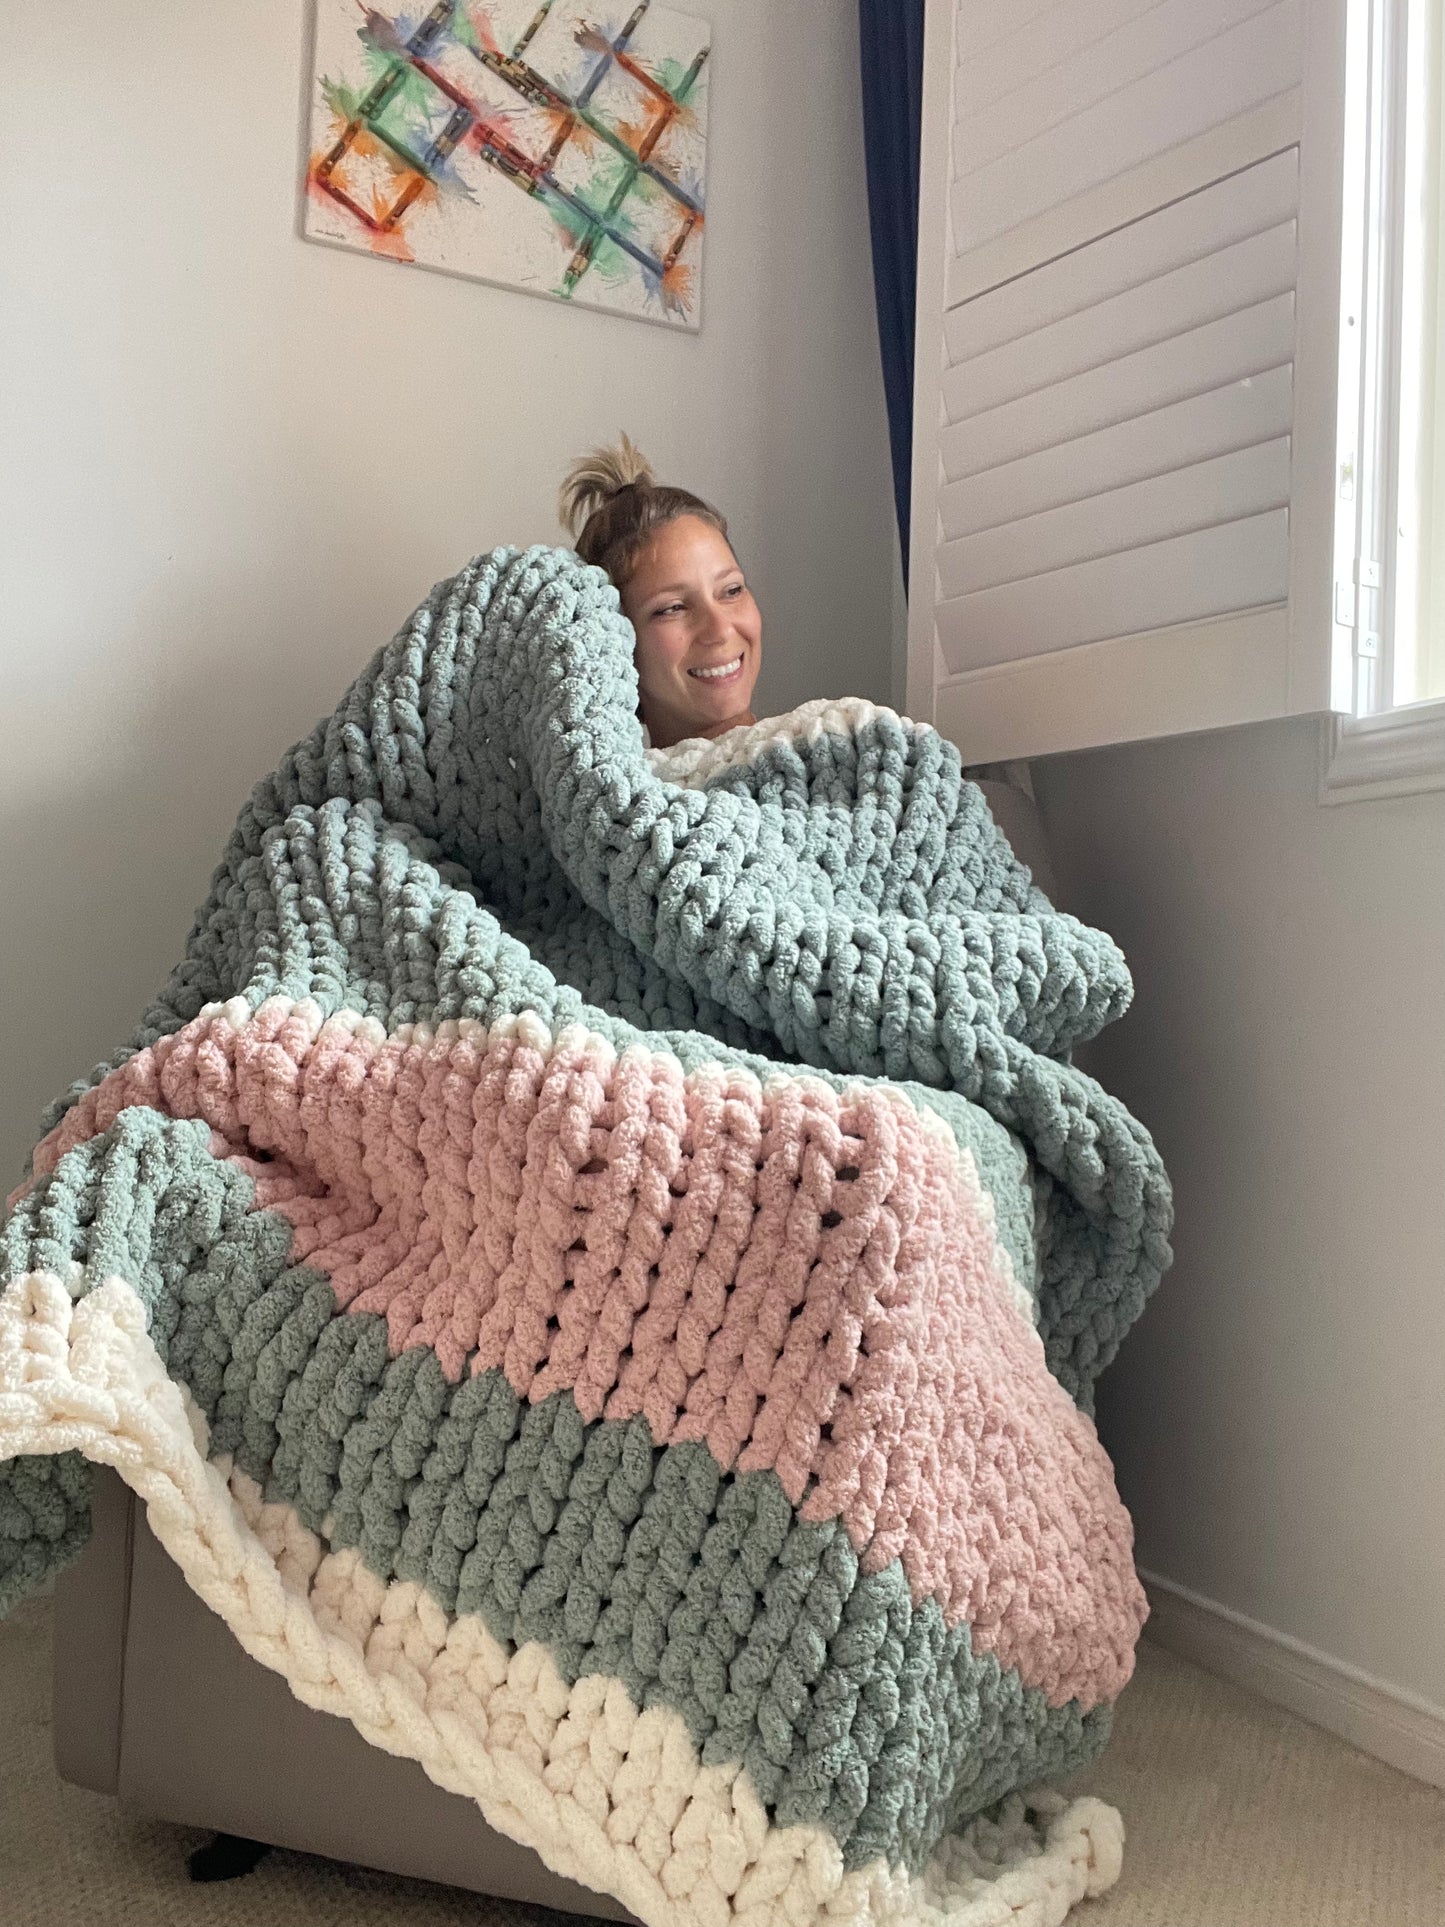 Healing Hand, Chunky Knit Blankets - Dolly